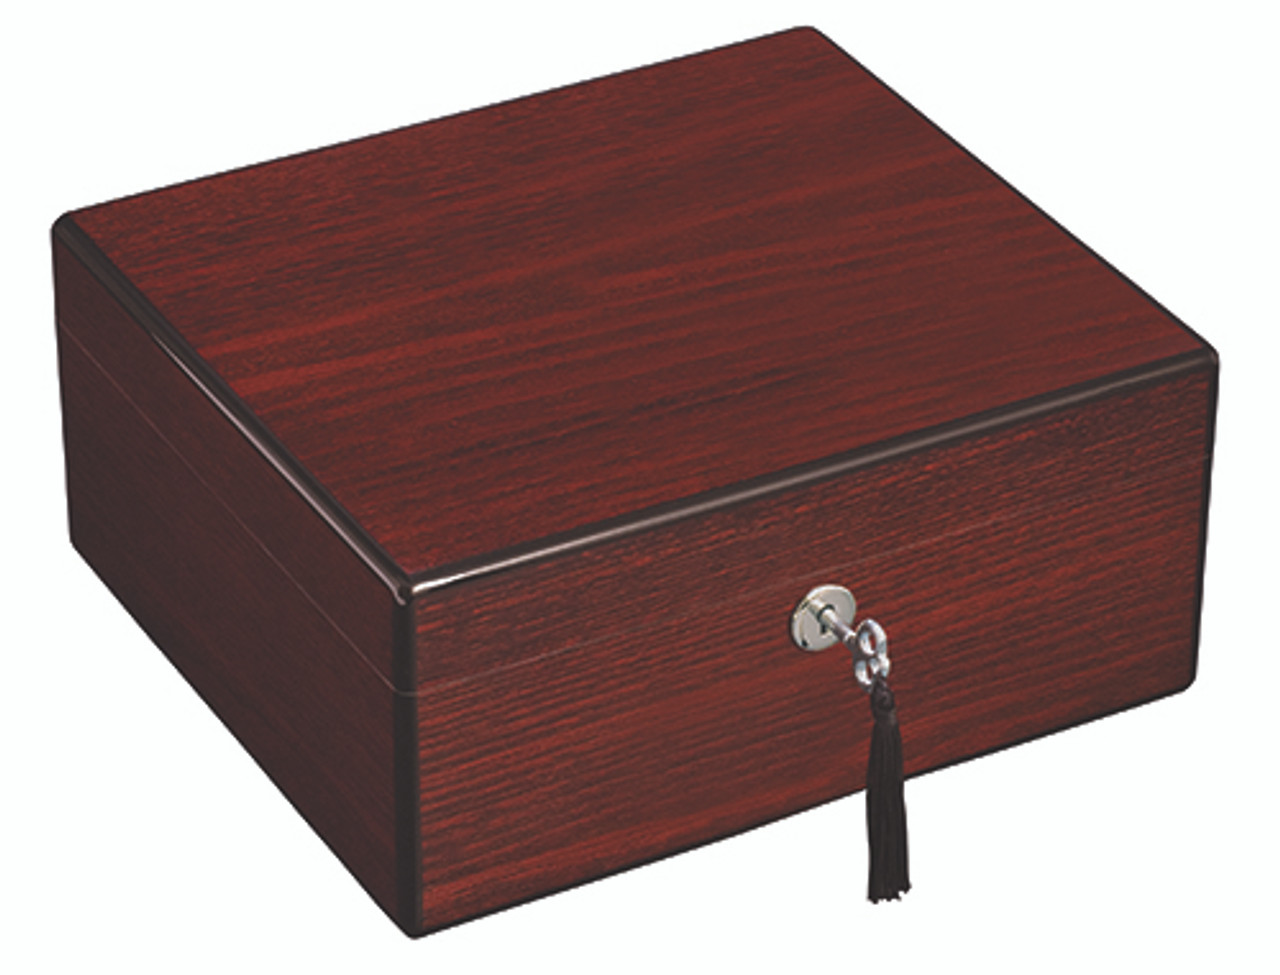 Diamond Crown Oxford Humidors discount prices